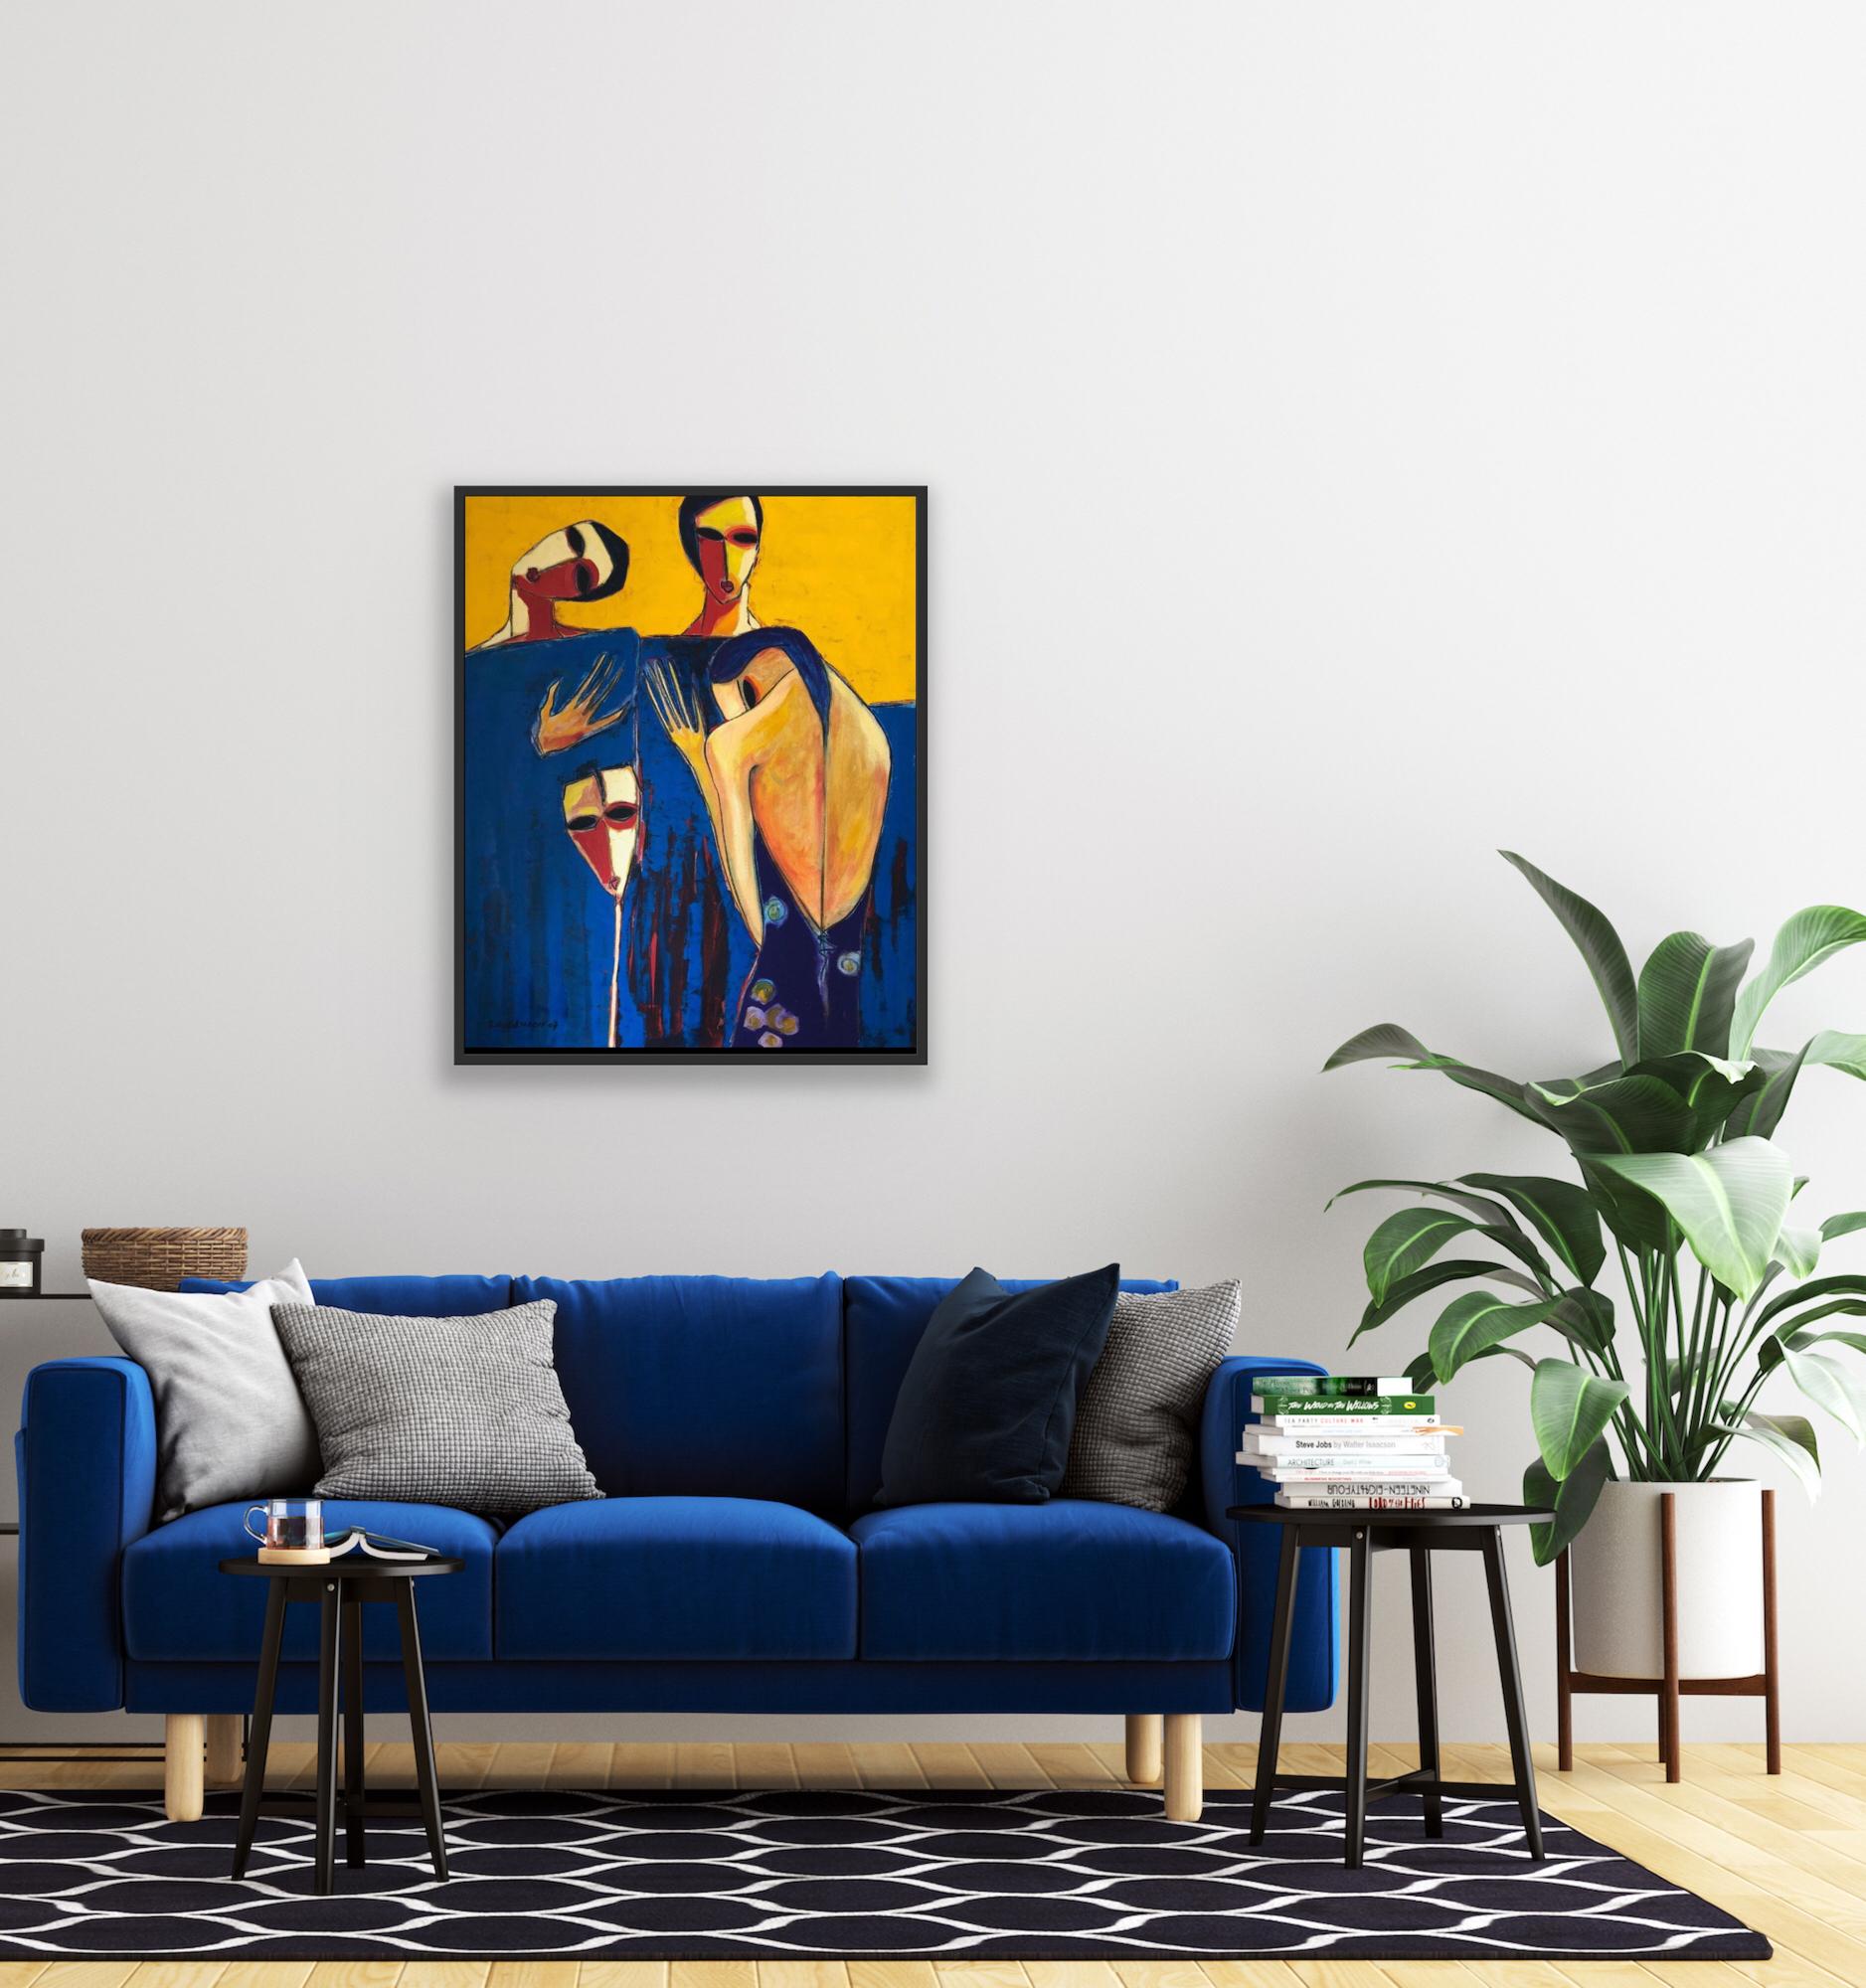 Brightly colored contemporary figurative painting by Moroccan artist Khalid Nadif. 

The painting is offered in a simple wood frame. 

Size: 40 x 32.5 inches (framed)

Signed on the back by the artist.

Portrait, female figure, women, figurative